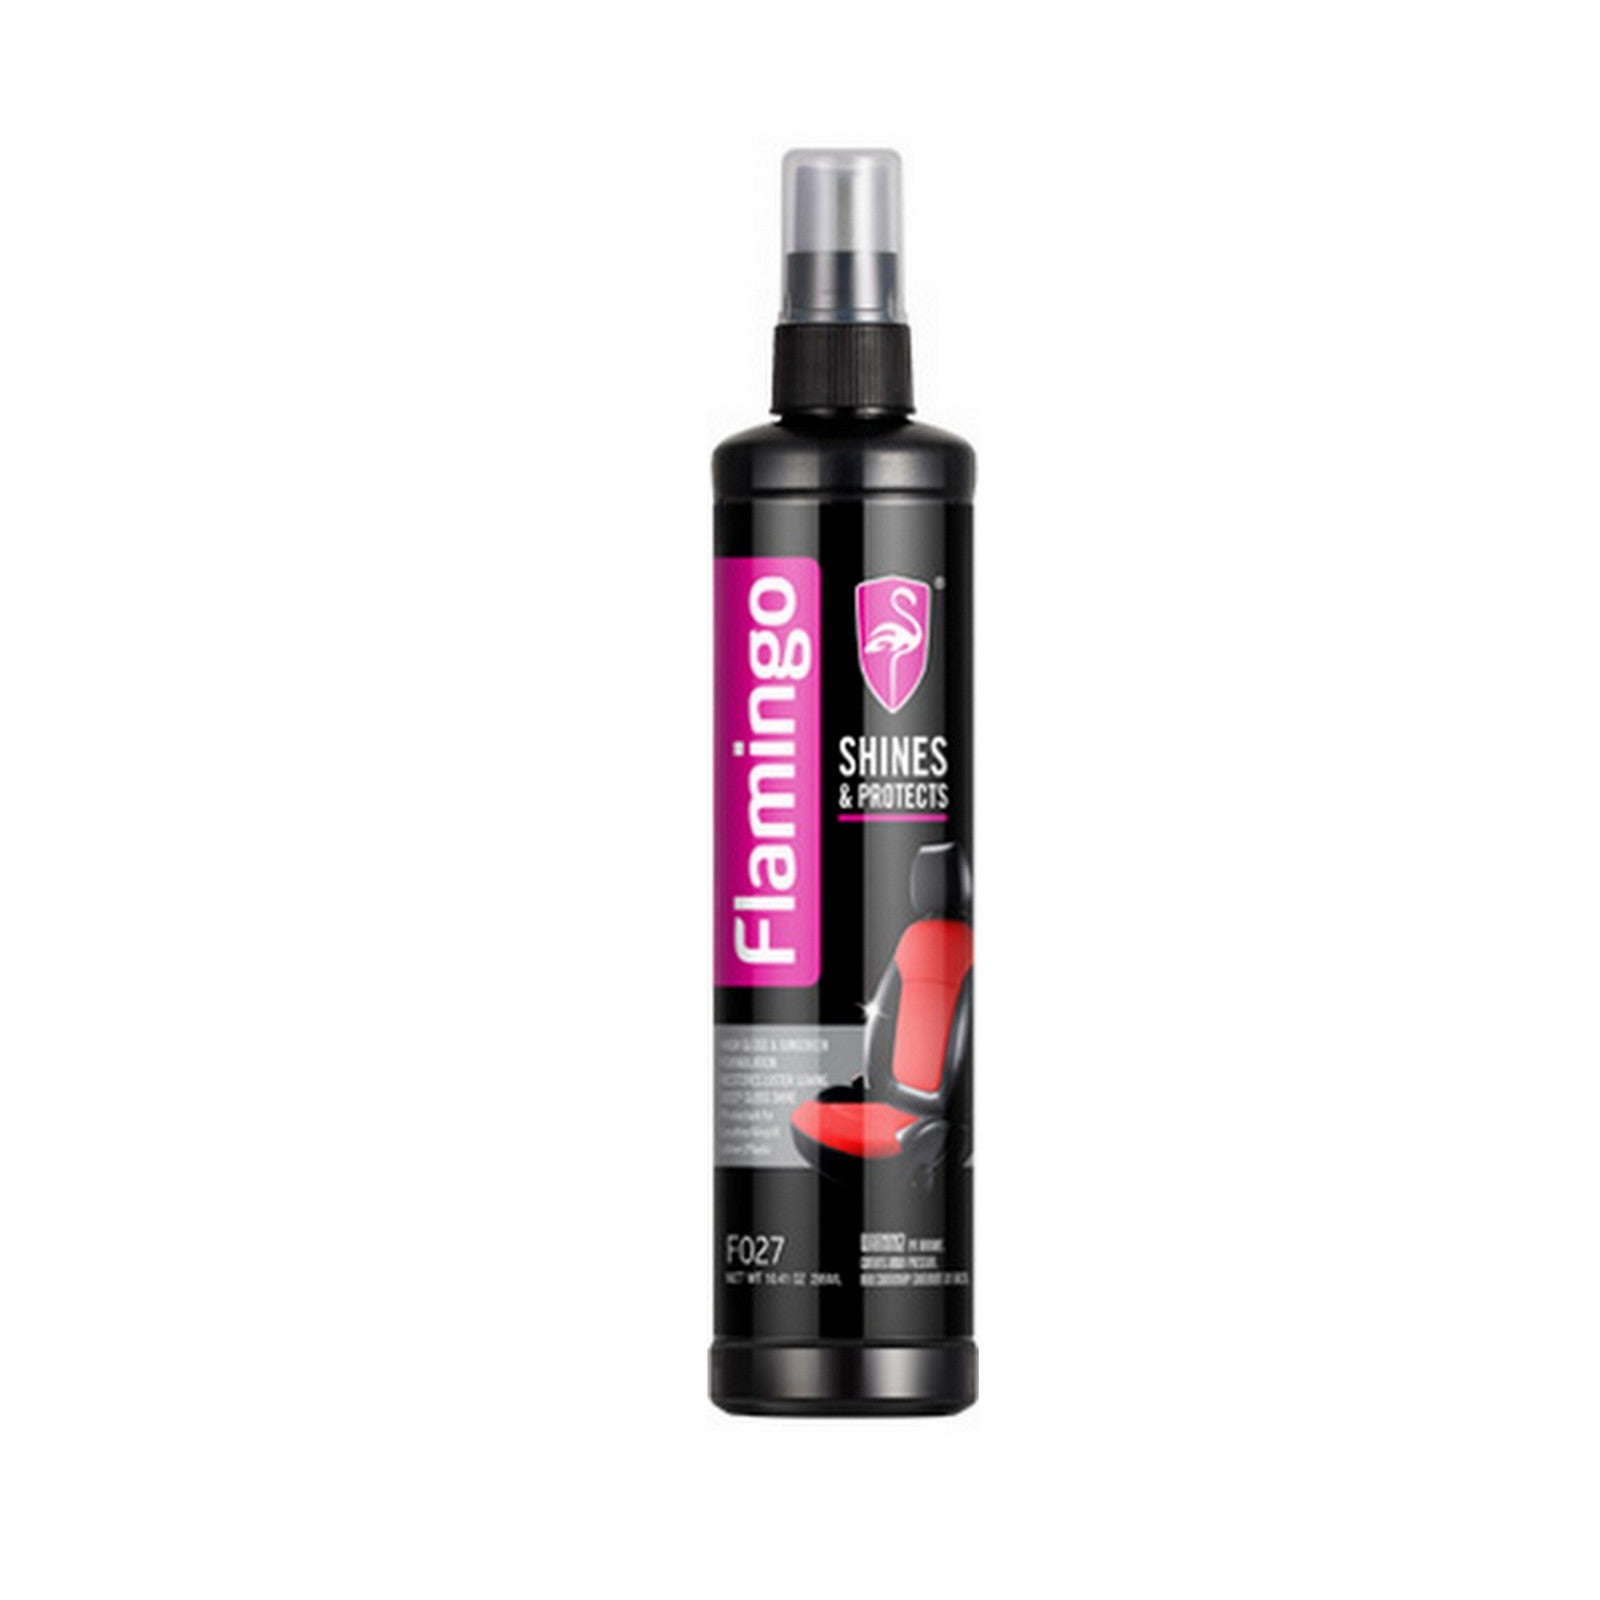 FLAMINGO, SHINES & PROTECTS PROTECTANT DASHBOARD CLEANER